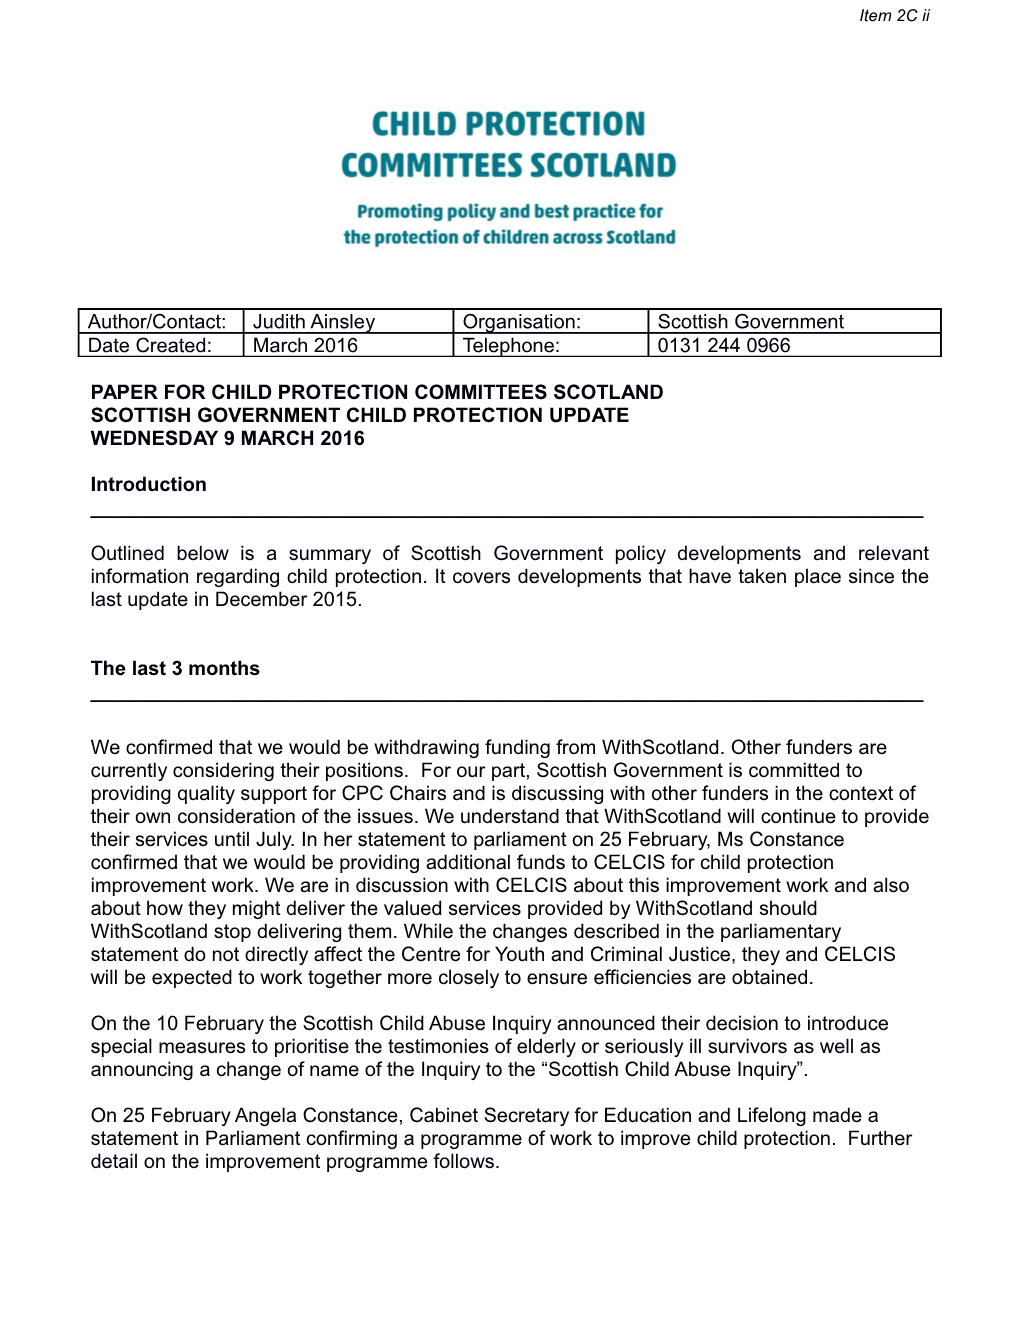 Paper for Child Protection Committees Scotland